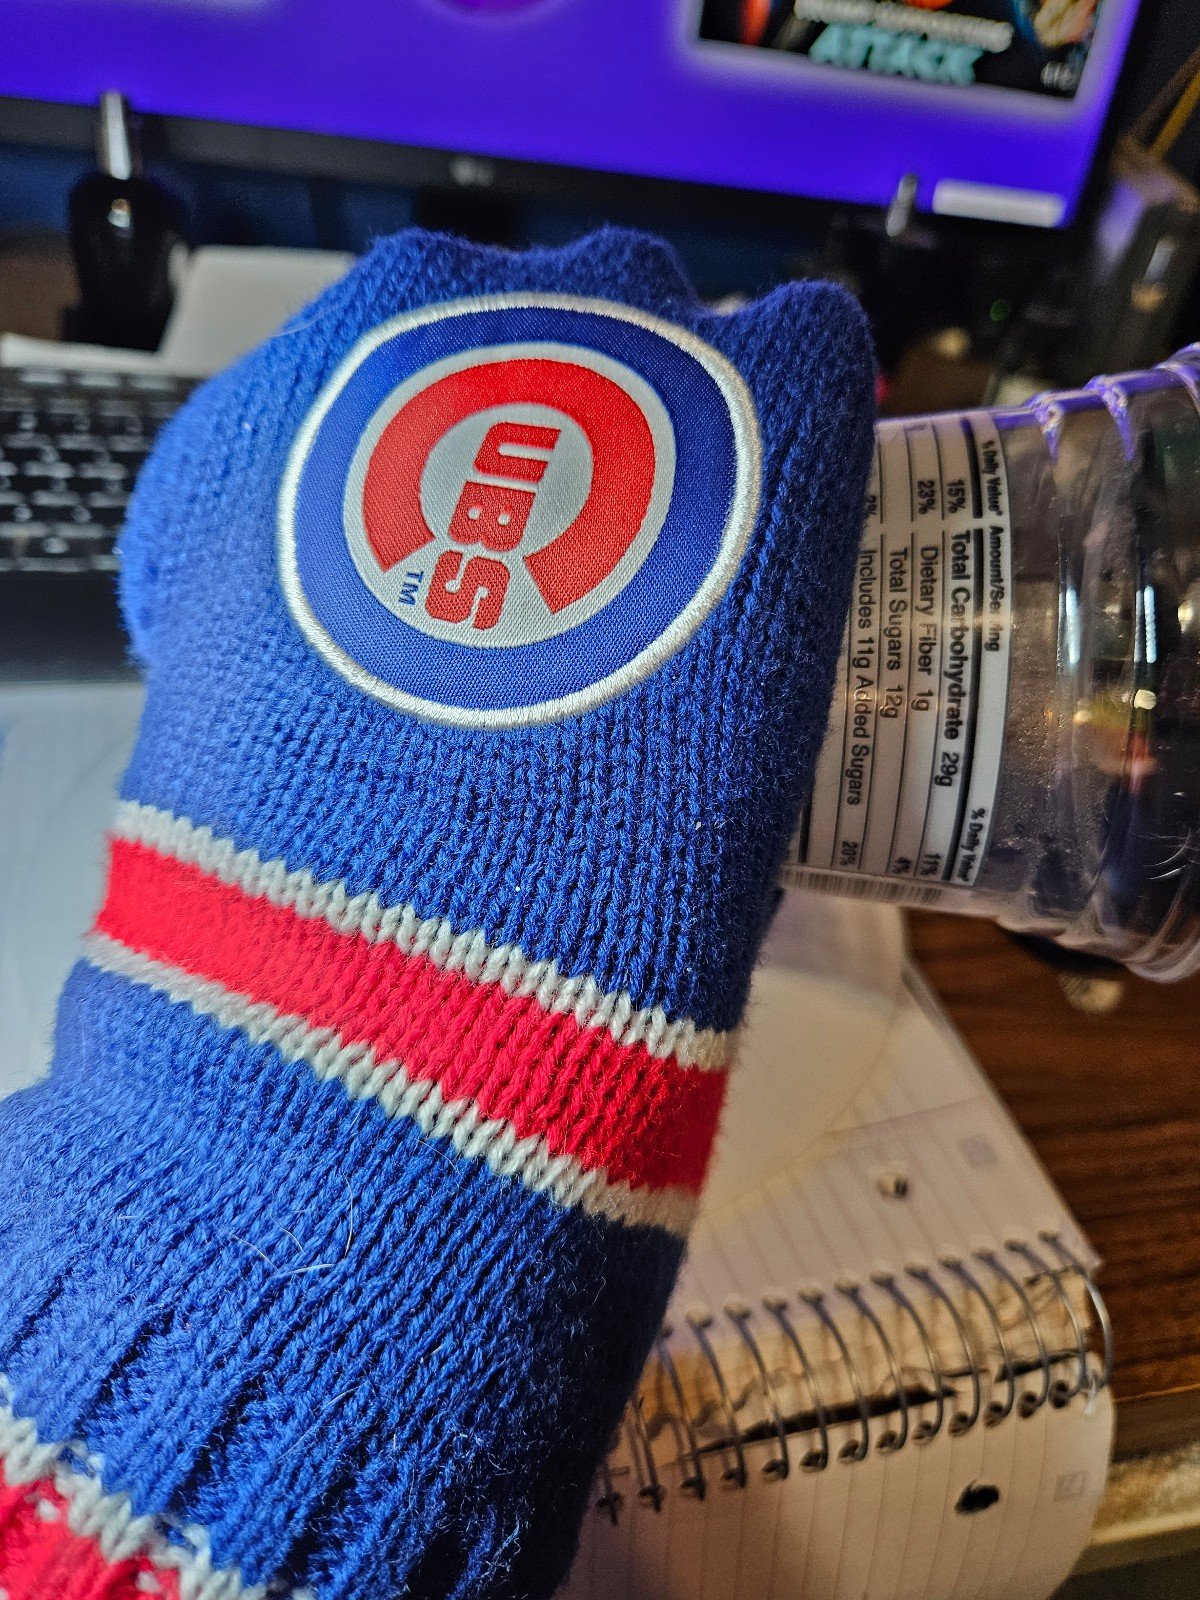 Cubs knit beer holder 33kWhgE6a